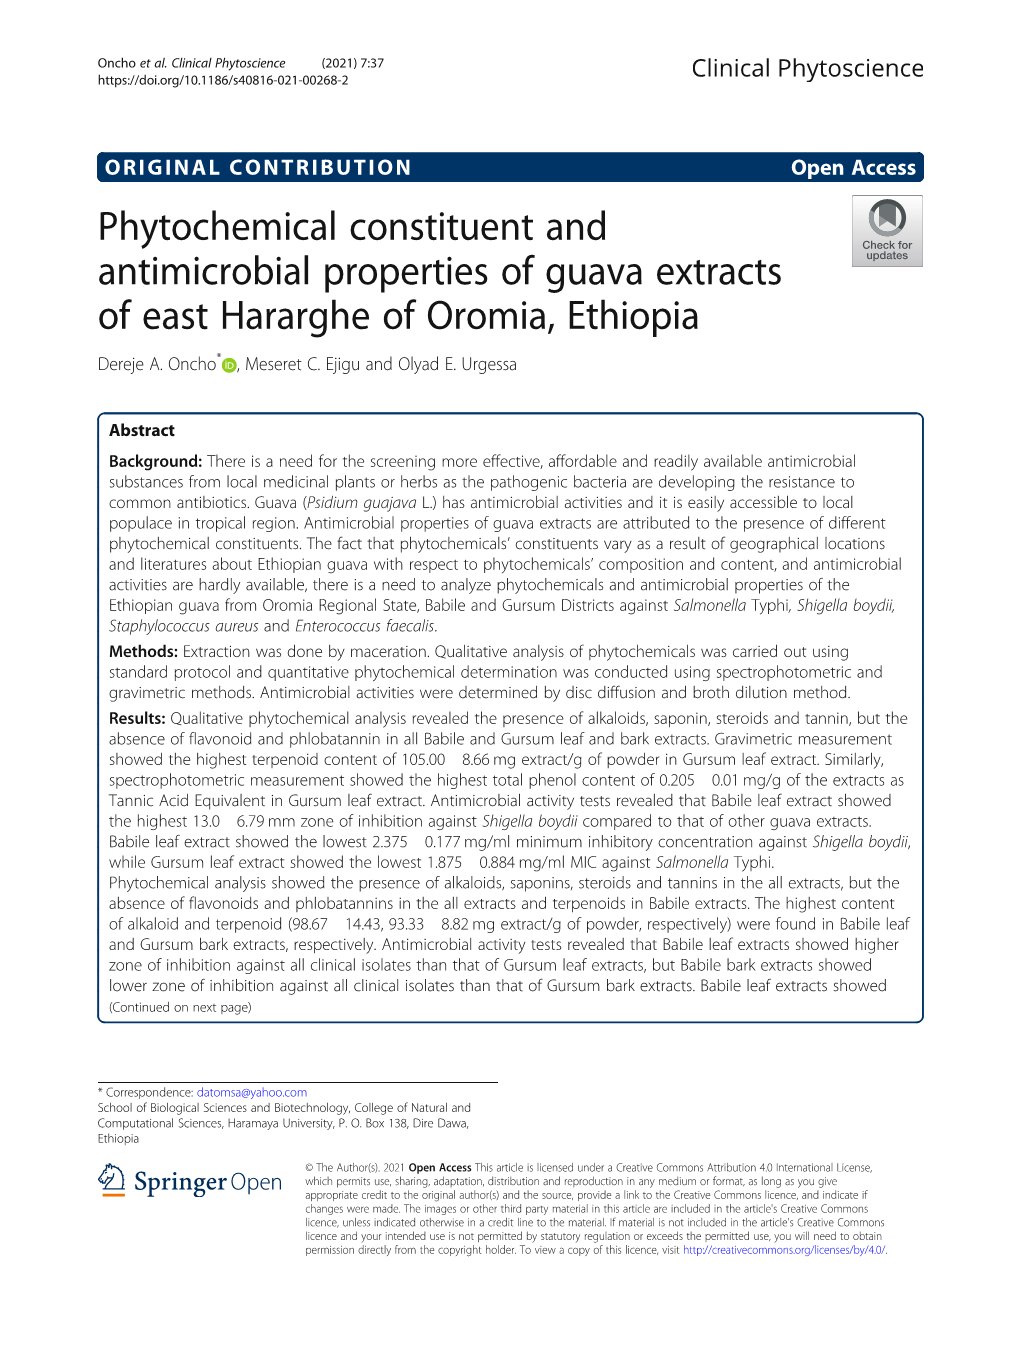 Phytochemical Constituent and Antimicrobial Properties of Guava Extracts of East Hararghe of Oromia, Ethiopia Dereje A